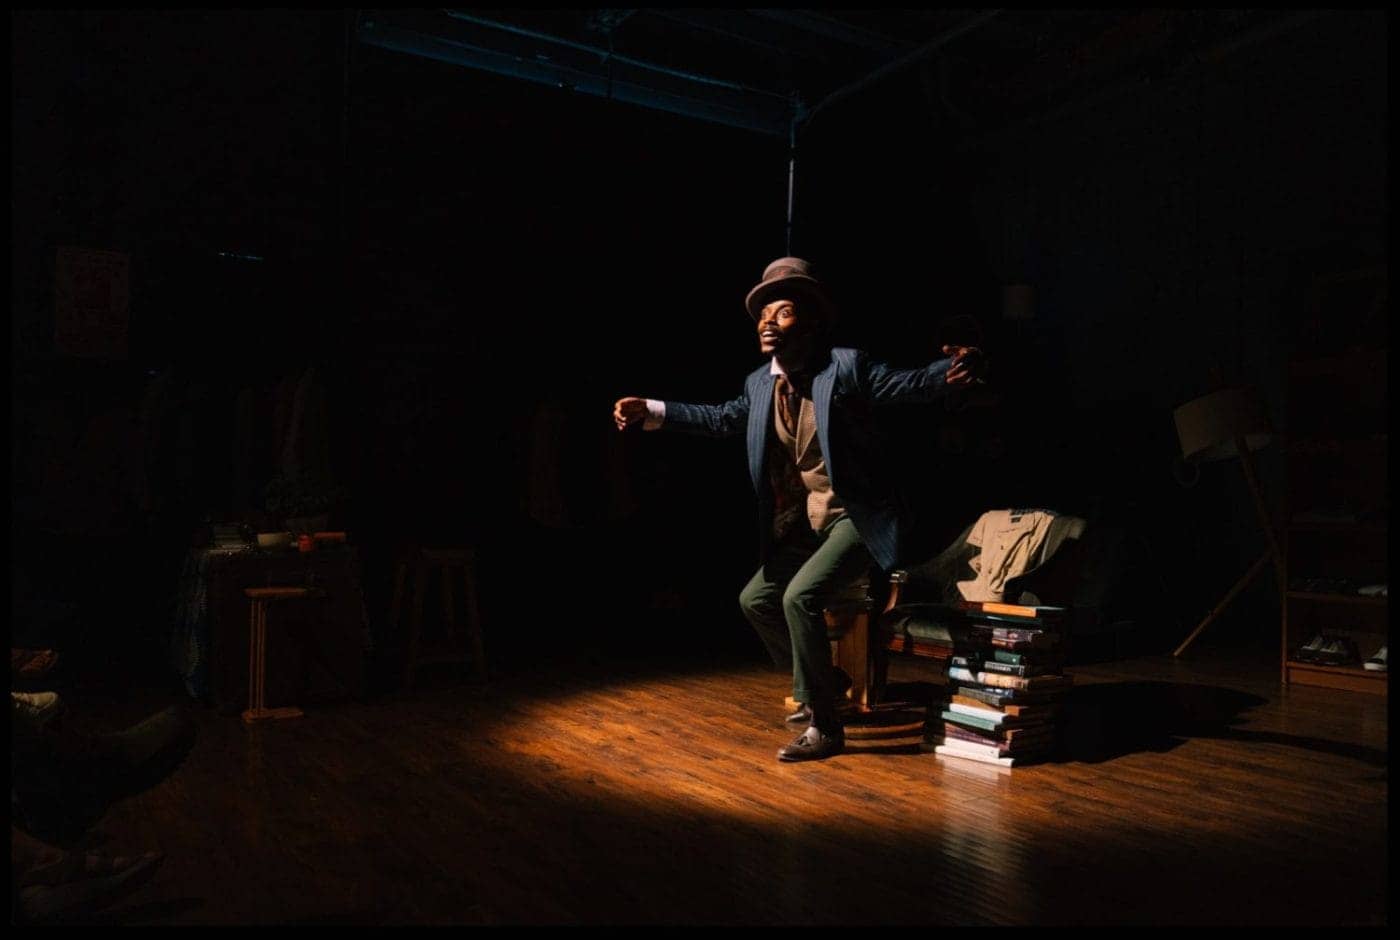 Michael-Wayne-Turner-III-onstage-1400x940, Thespian Michael Wayne Turner III is turning heads on Oakland stages, Culture Currents Local News & Views News & Views 